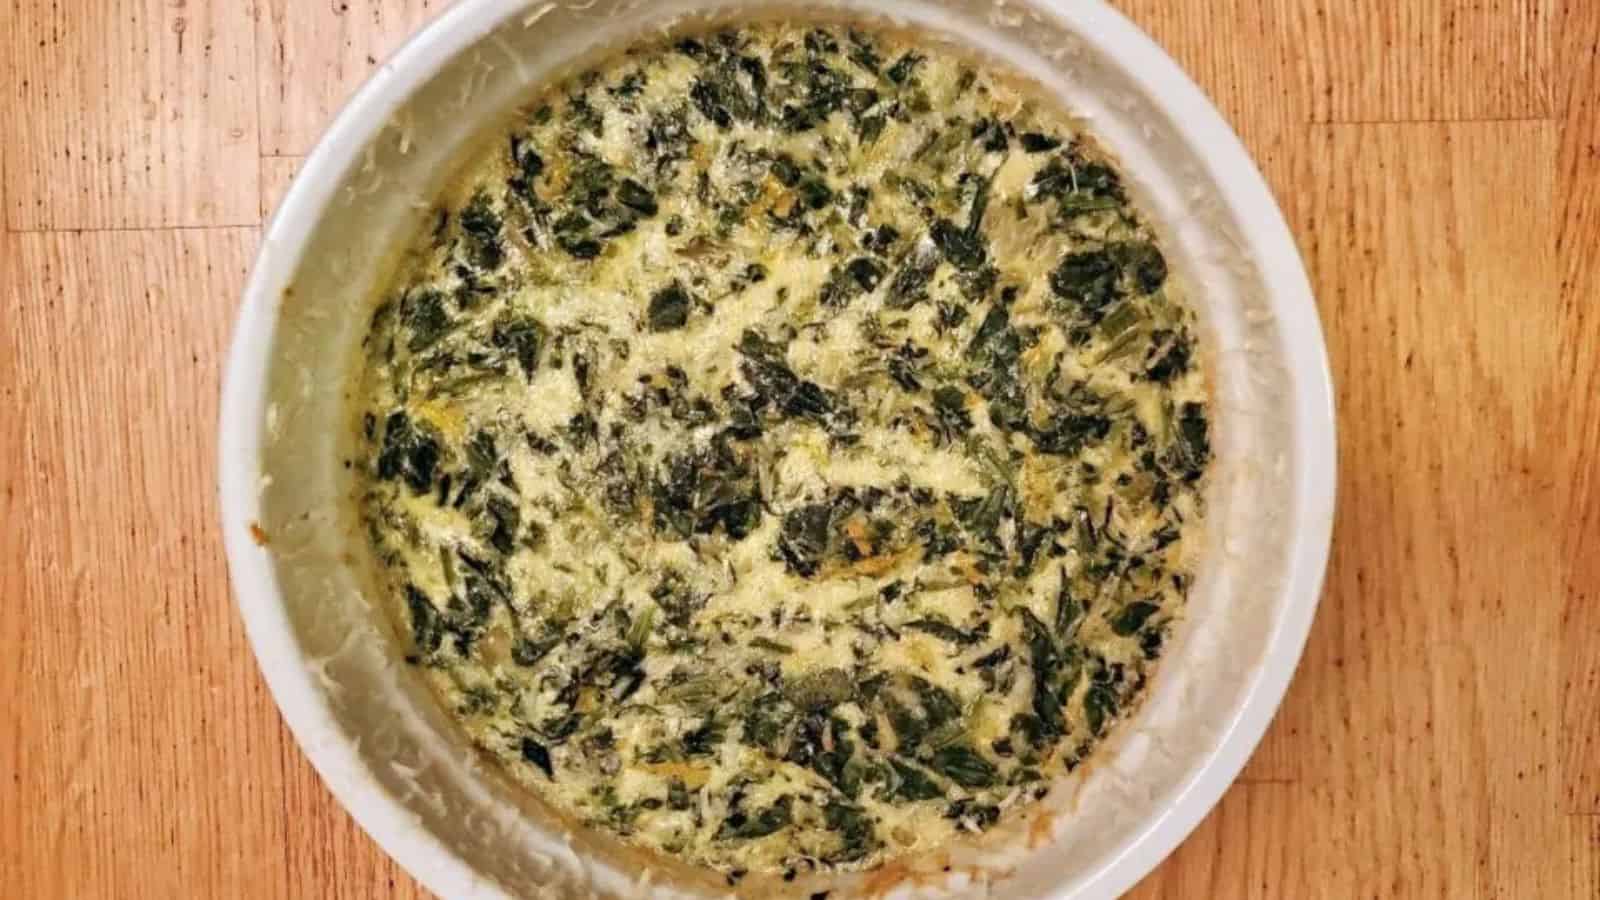 This photo shows and overhead shot of a spinach souffle in a round white casserole dish.